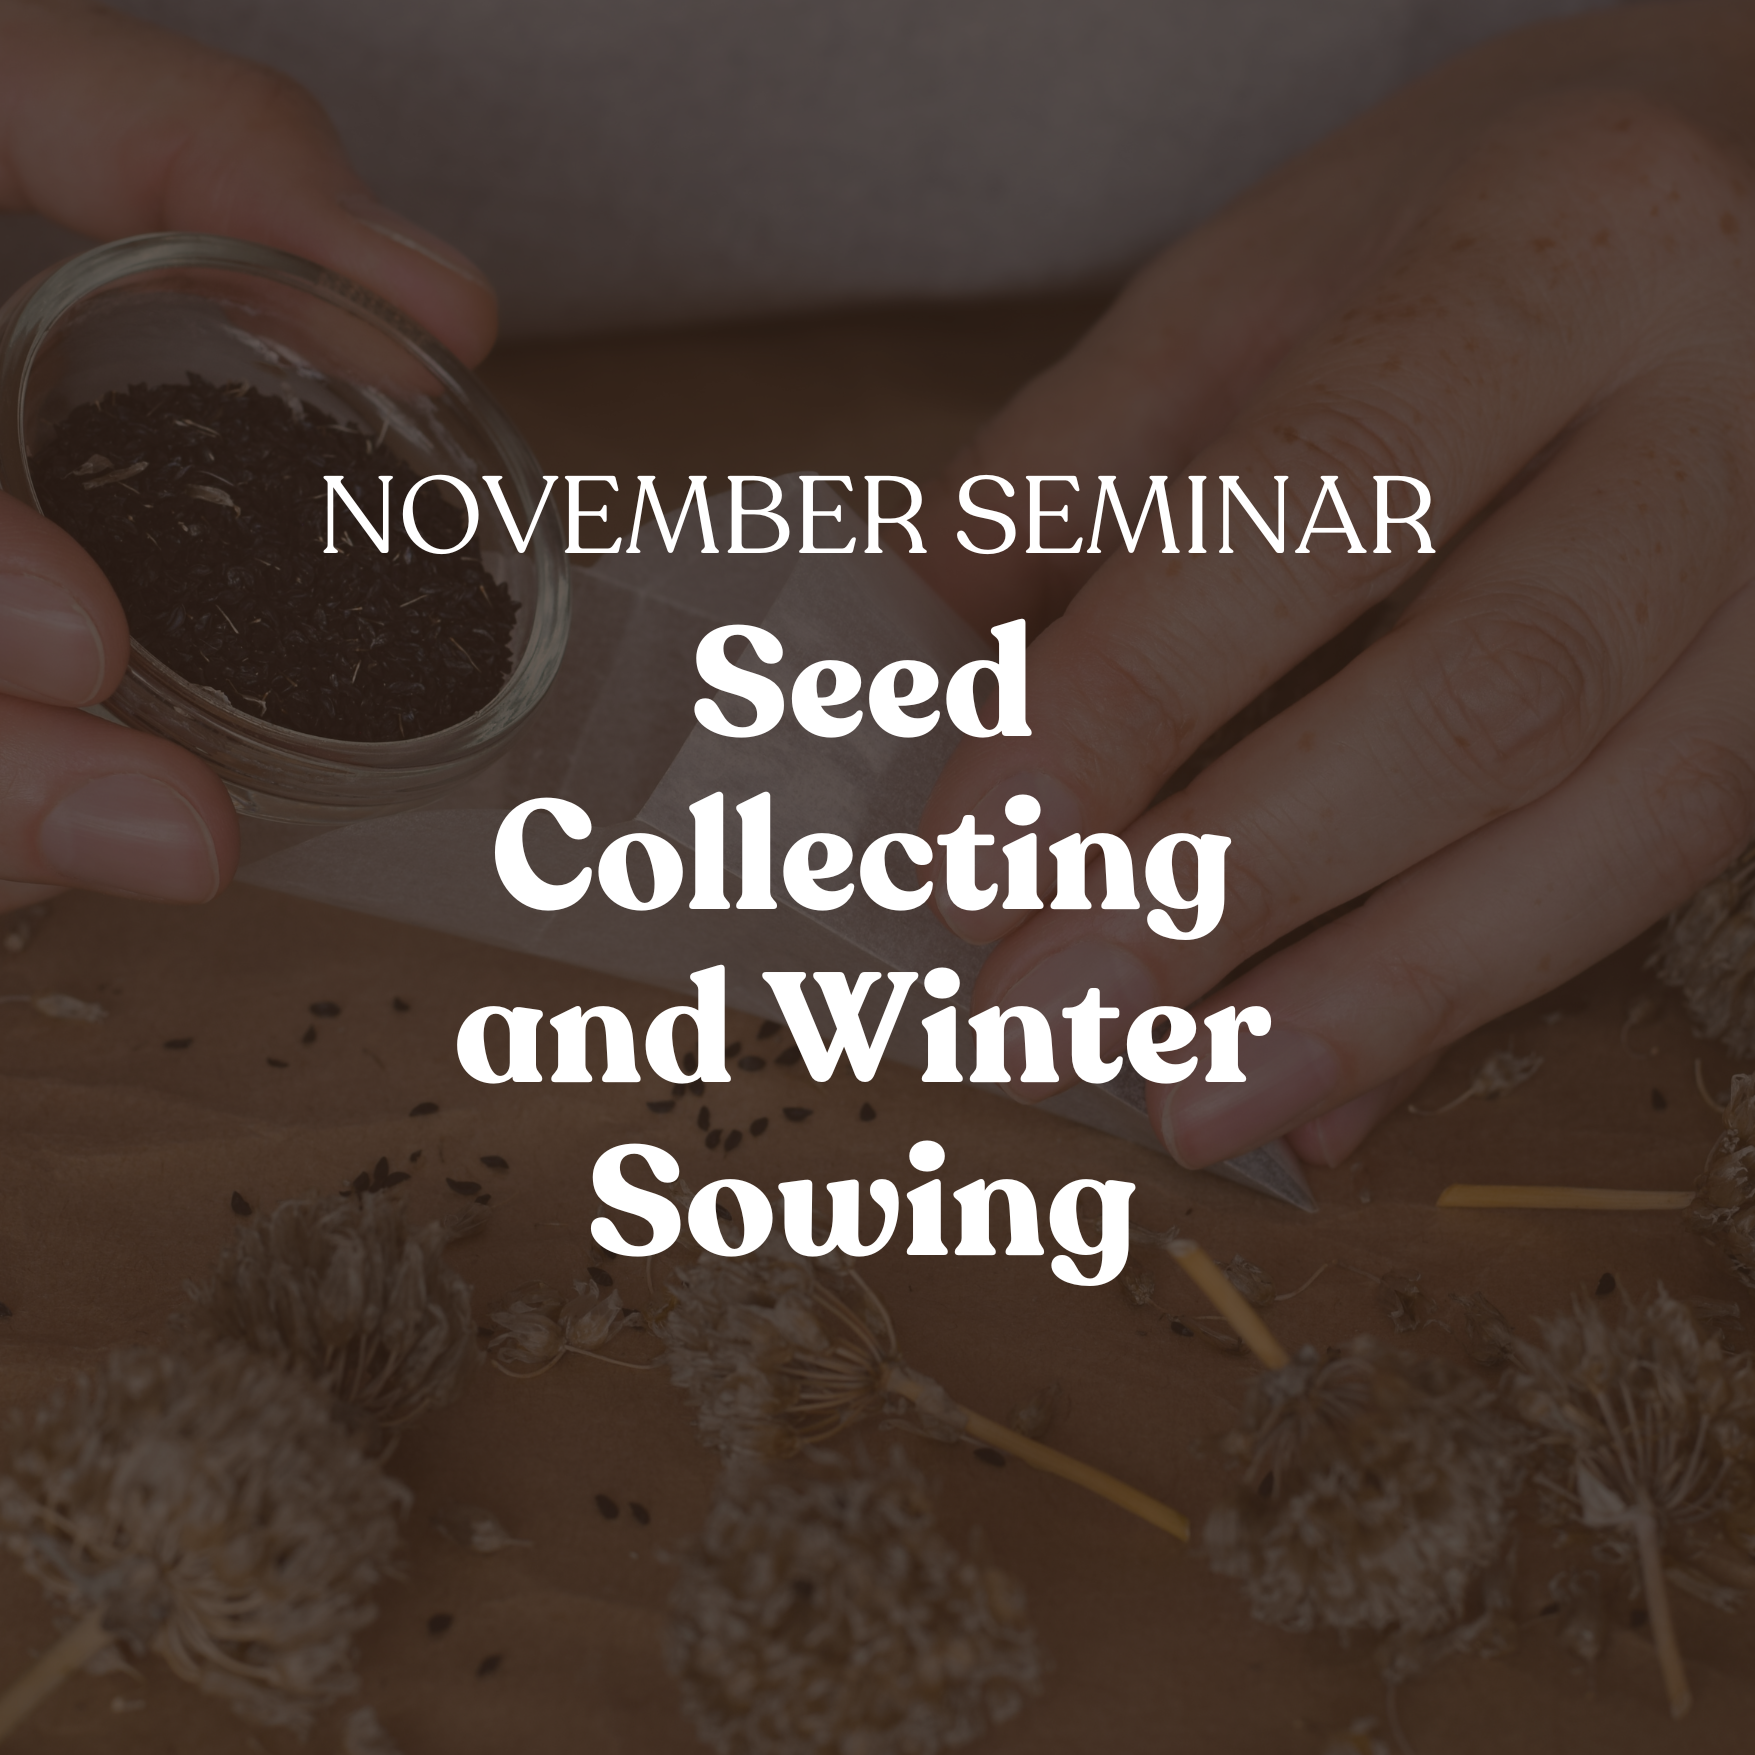 November GardenKitchener Seminar: Seed Collecting and Winter Sowing